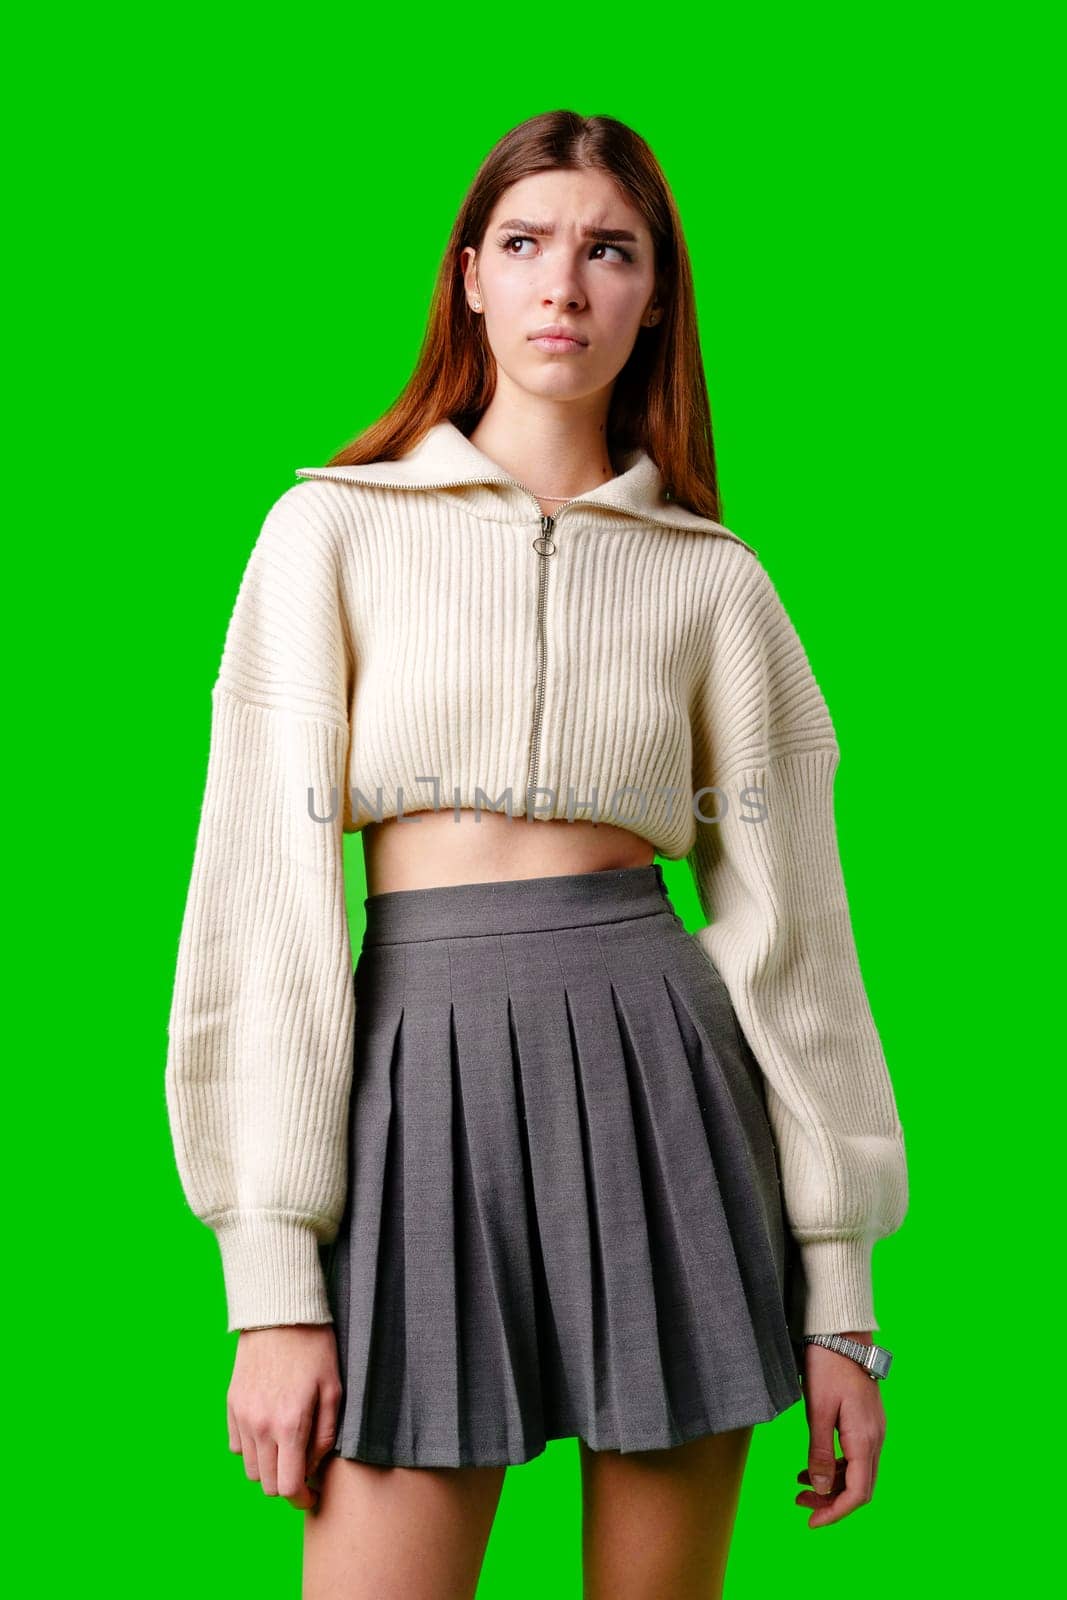 A woman wearing a skirt and sweater stands confidently against a vibrant green background. Her posture exudes strength and poise as she gazes ahead.